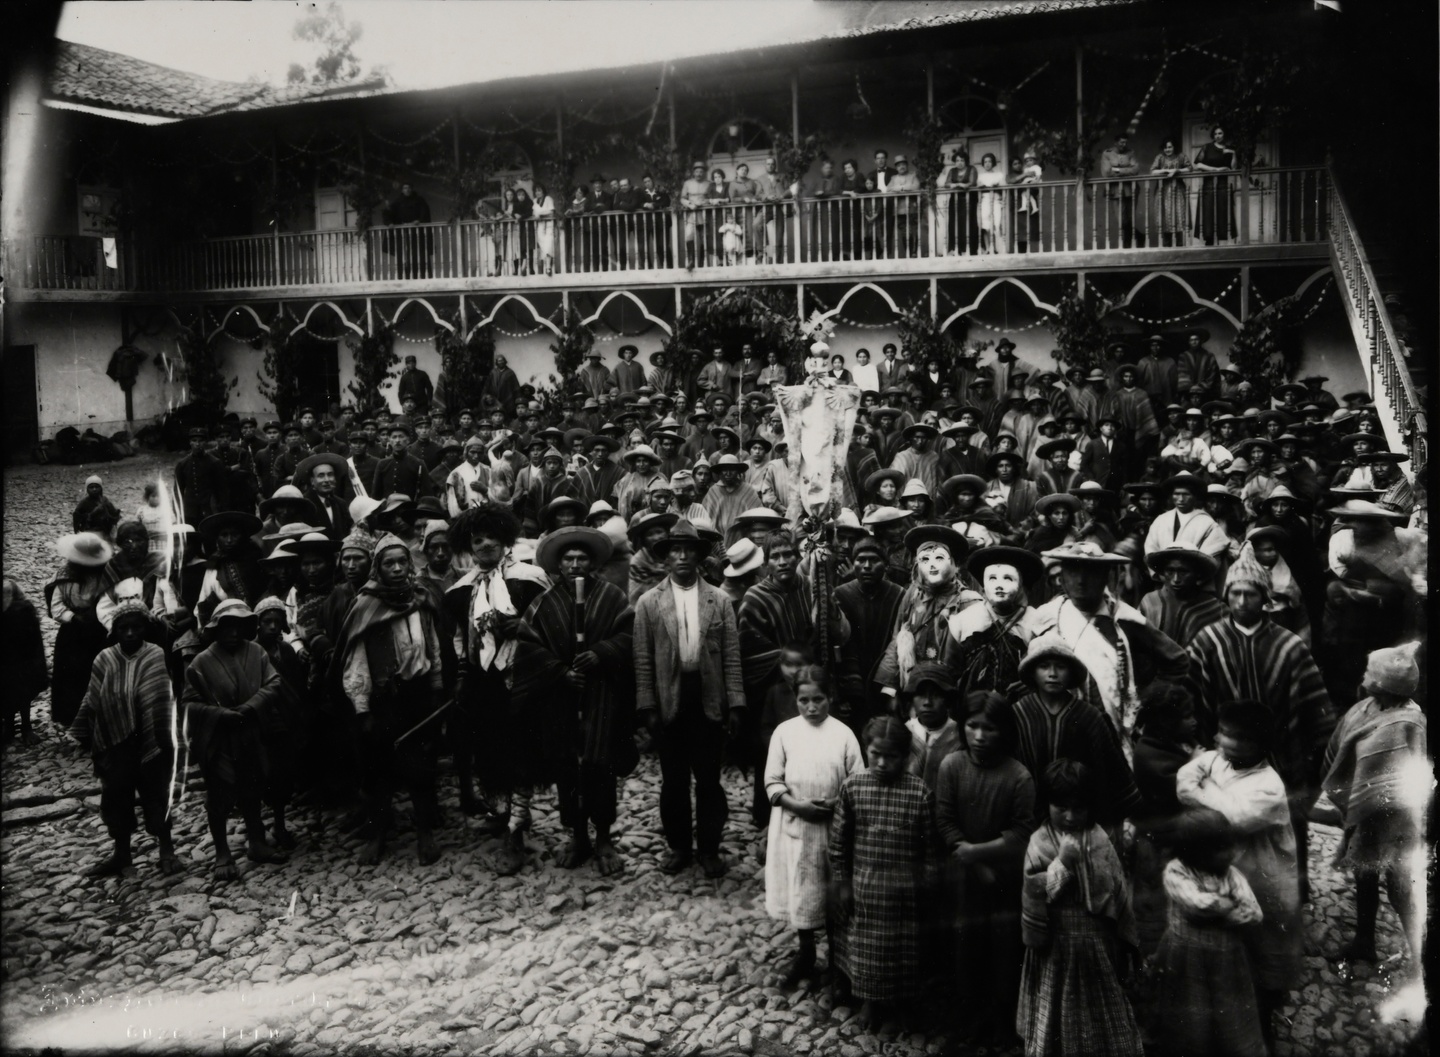 Black-and-white photo of a crowd gathered in celebration in a Peruvian courtyard